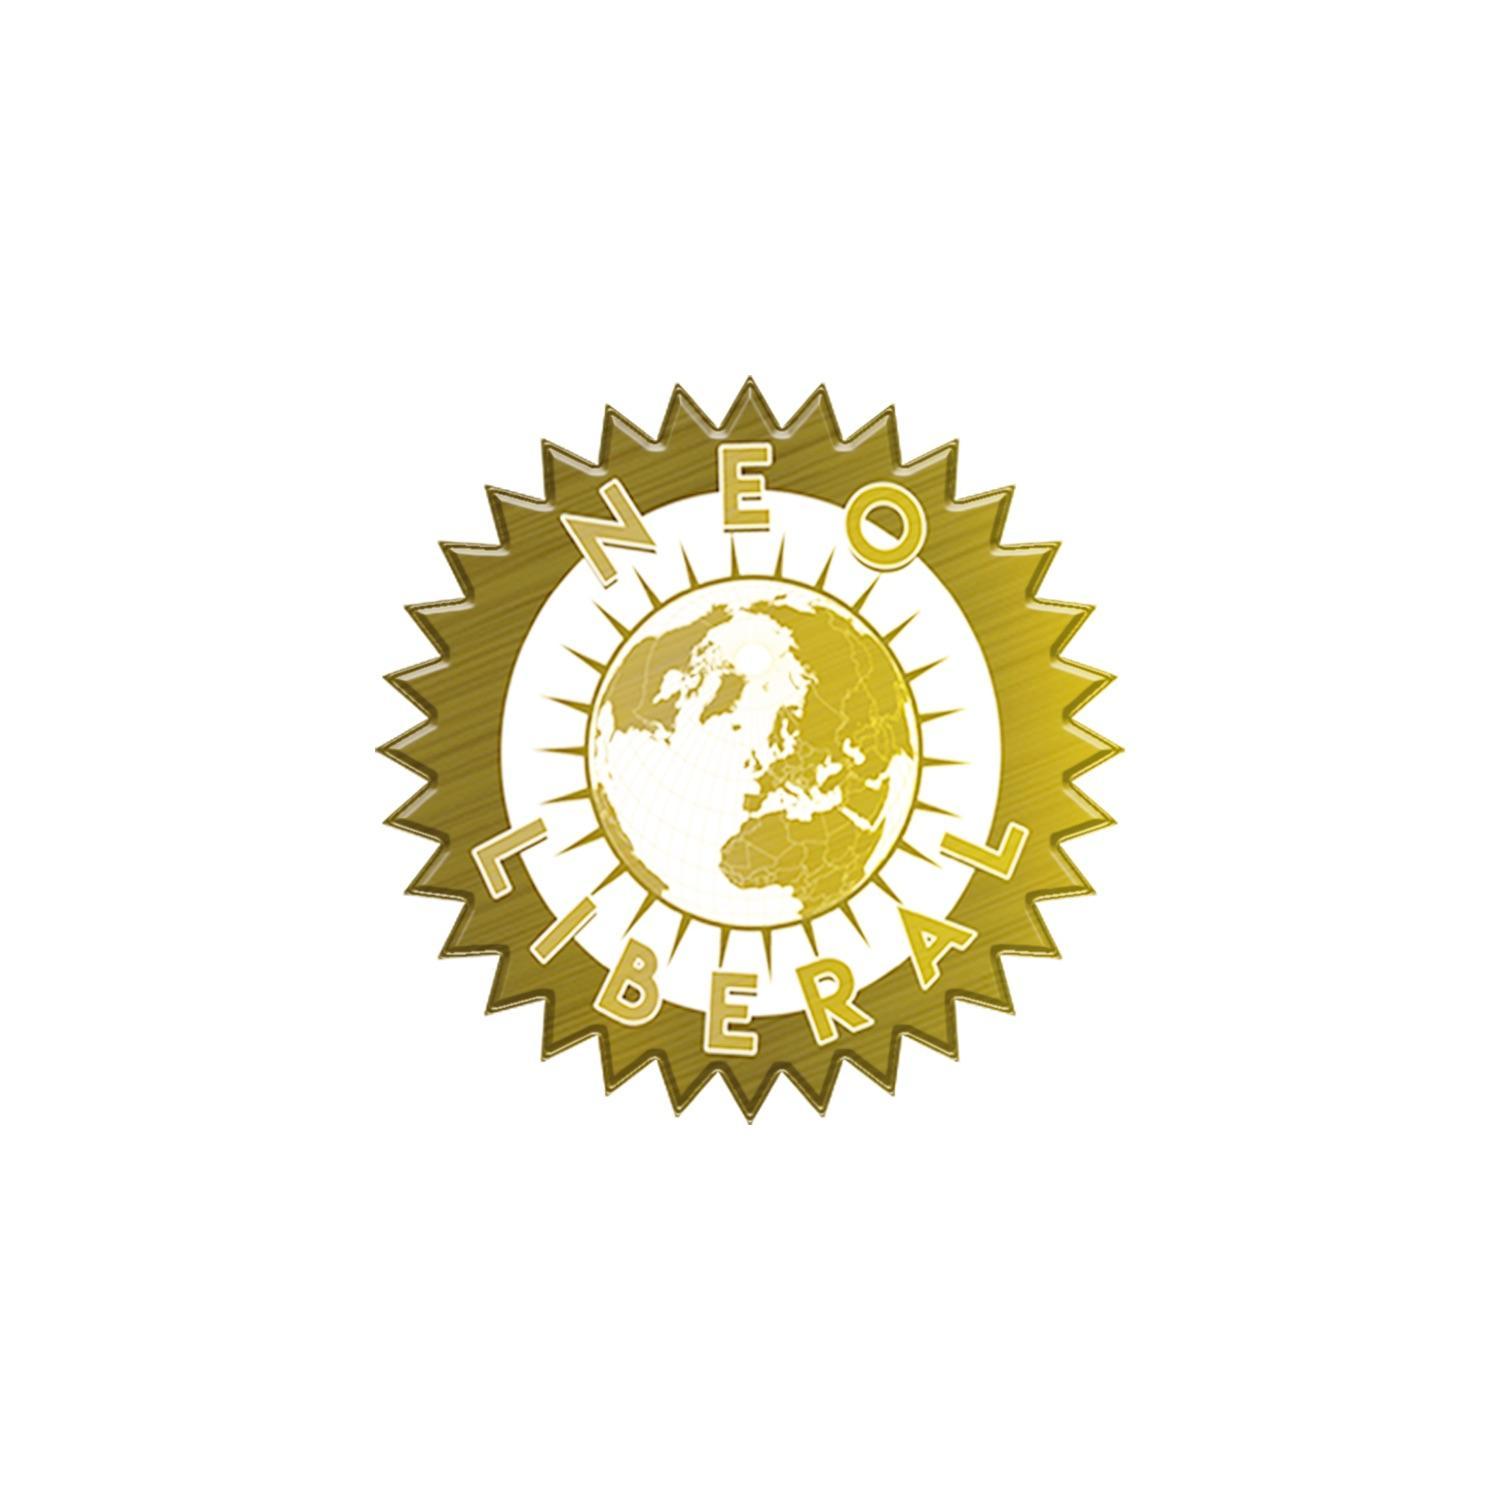 Cool Gold Logo - Made a gold edit of the logo, pretty simple but I thought it was